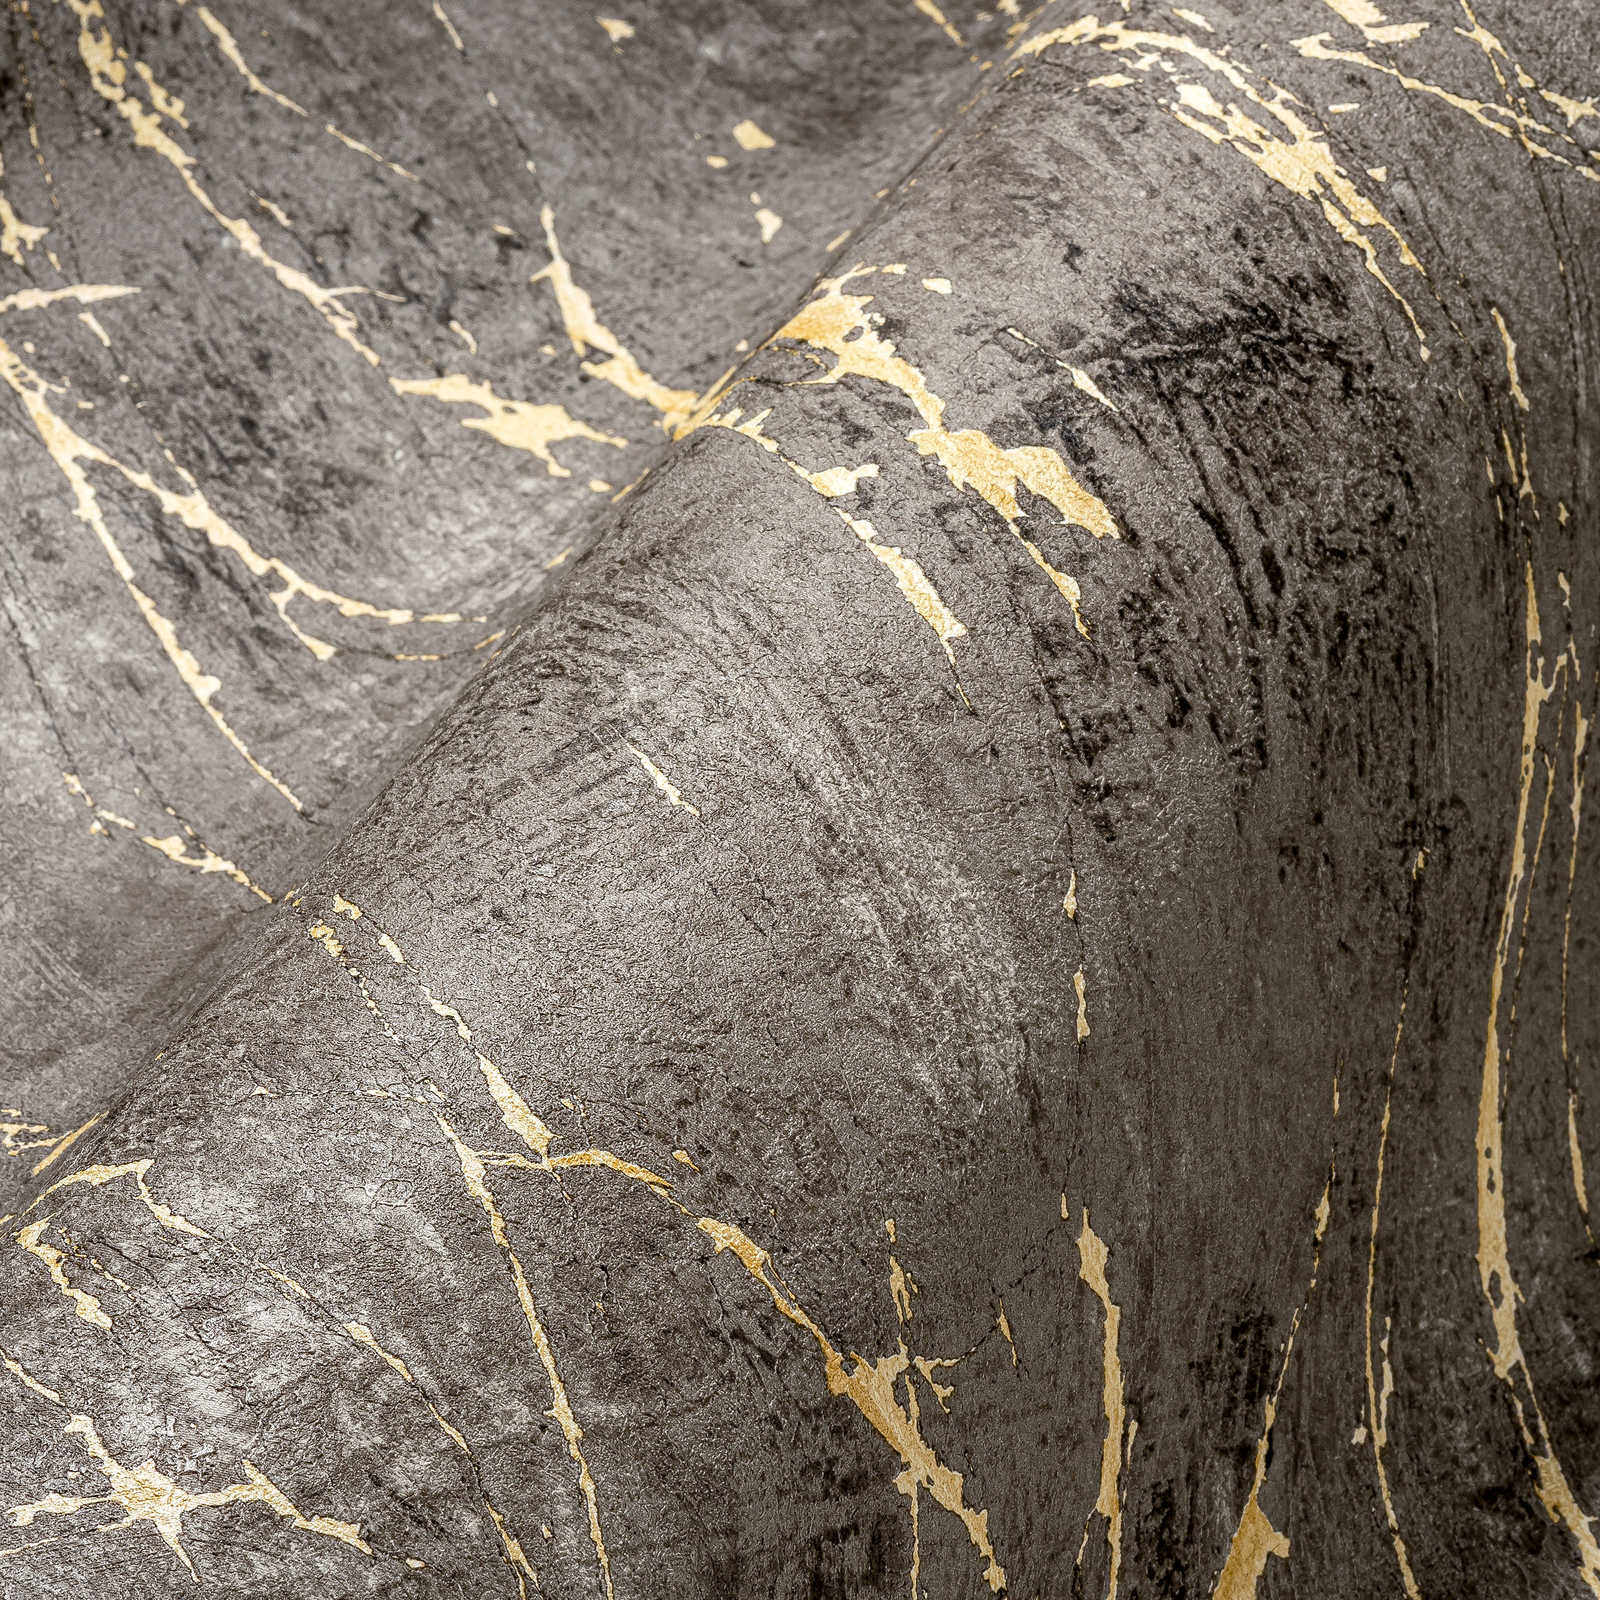             Black marble wallpaper with gold marble effect
        